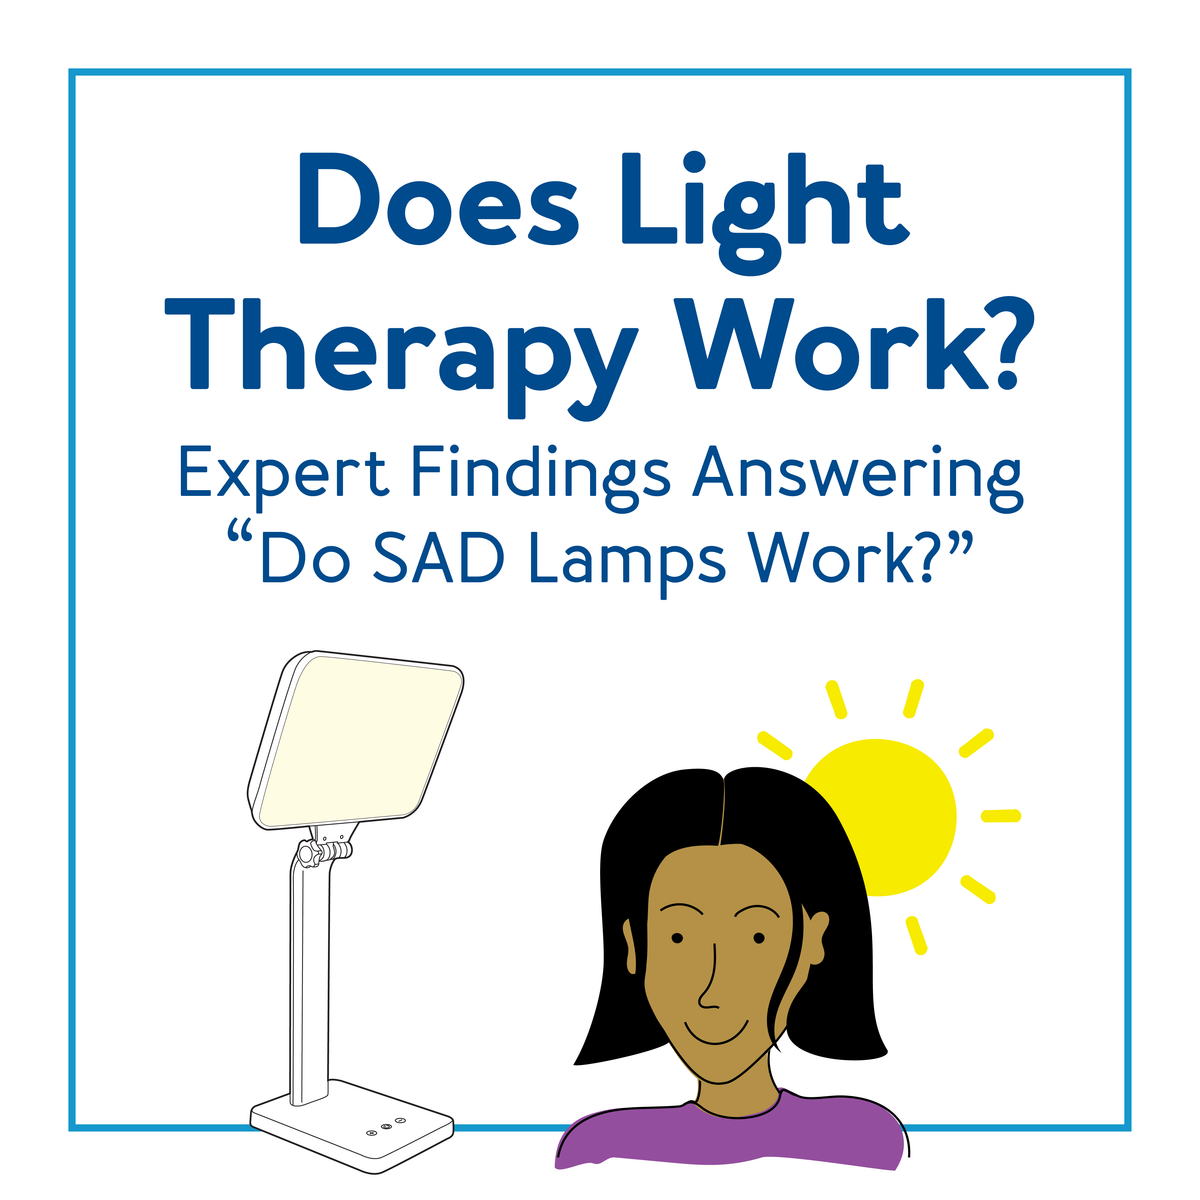 Does light therapy work? Expert findings answering do SAD lamps work?